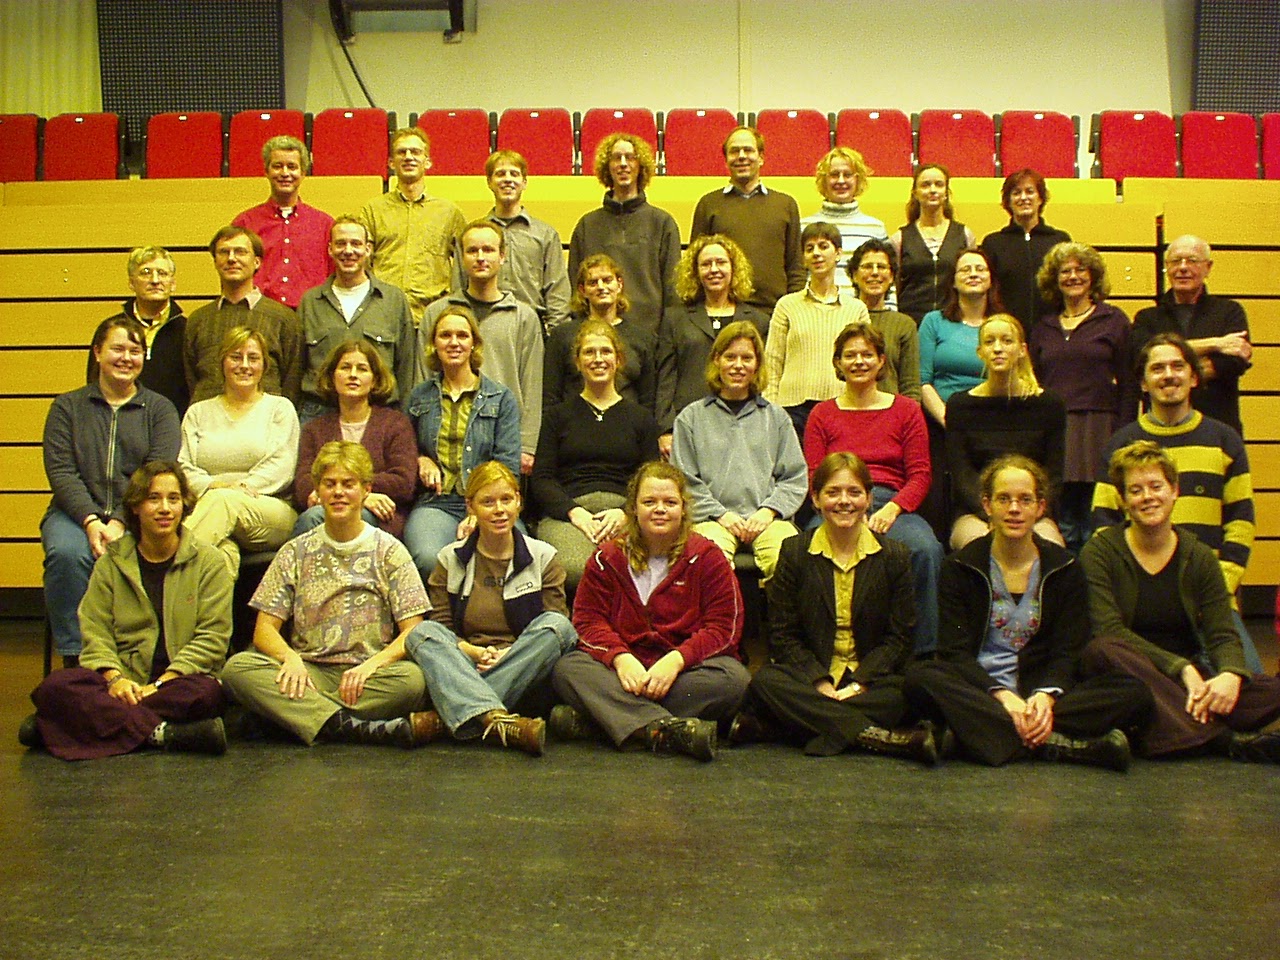 The first digital photo of the choir, 2002